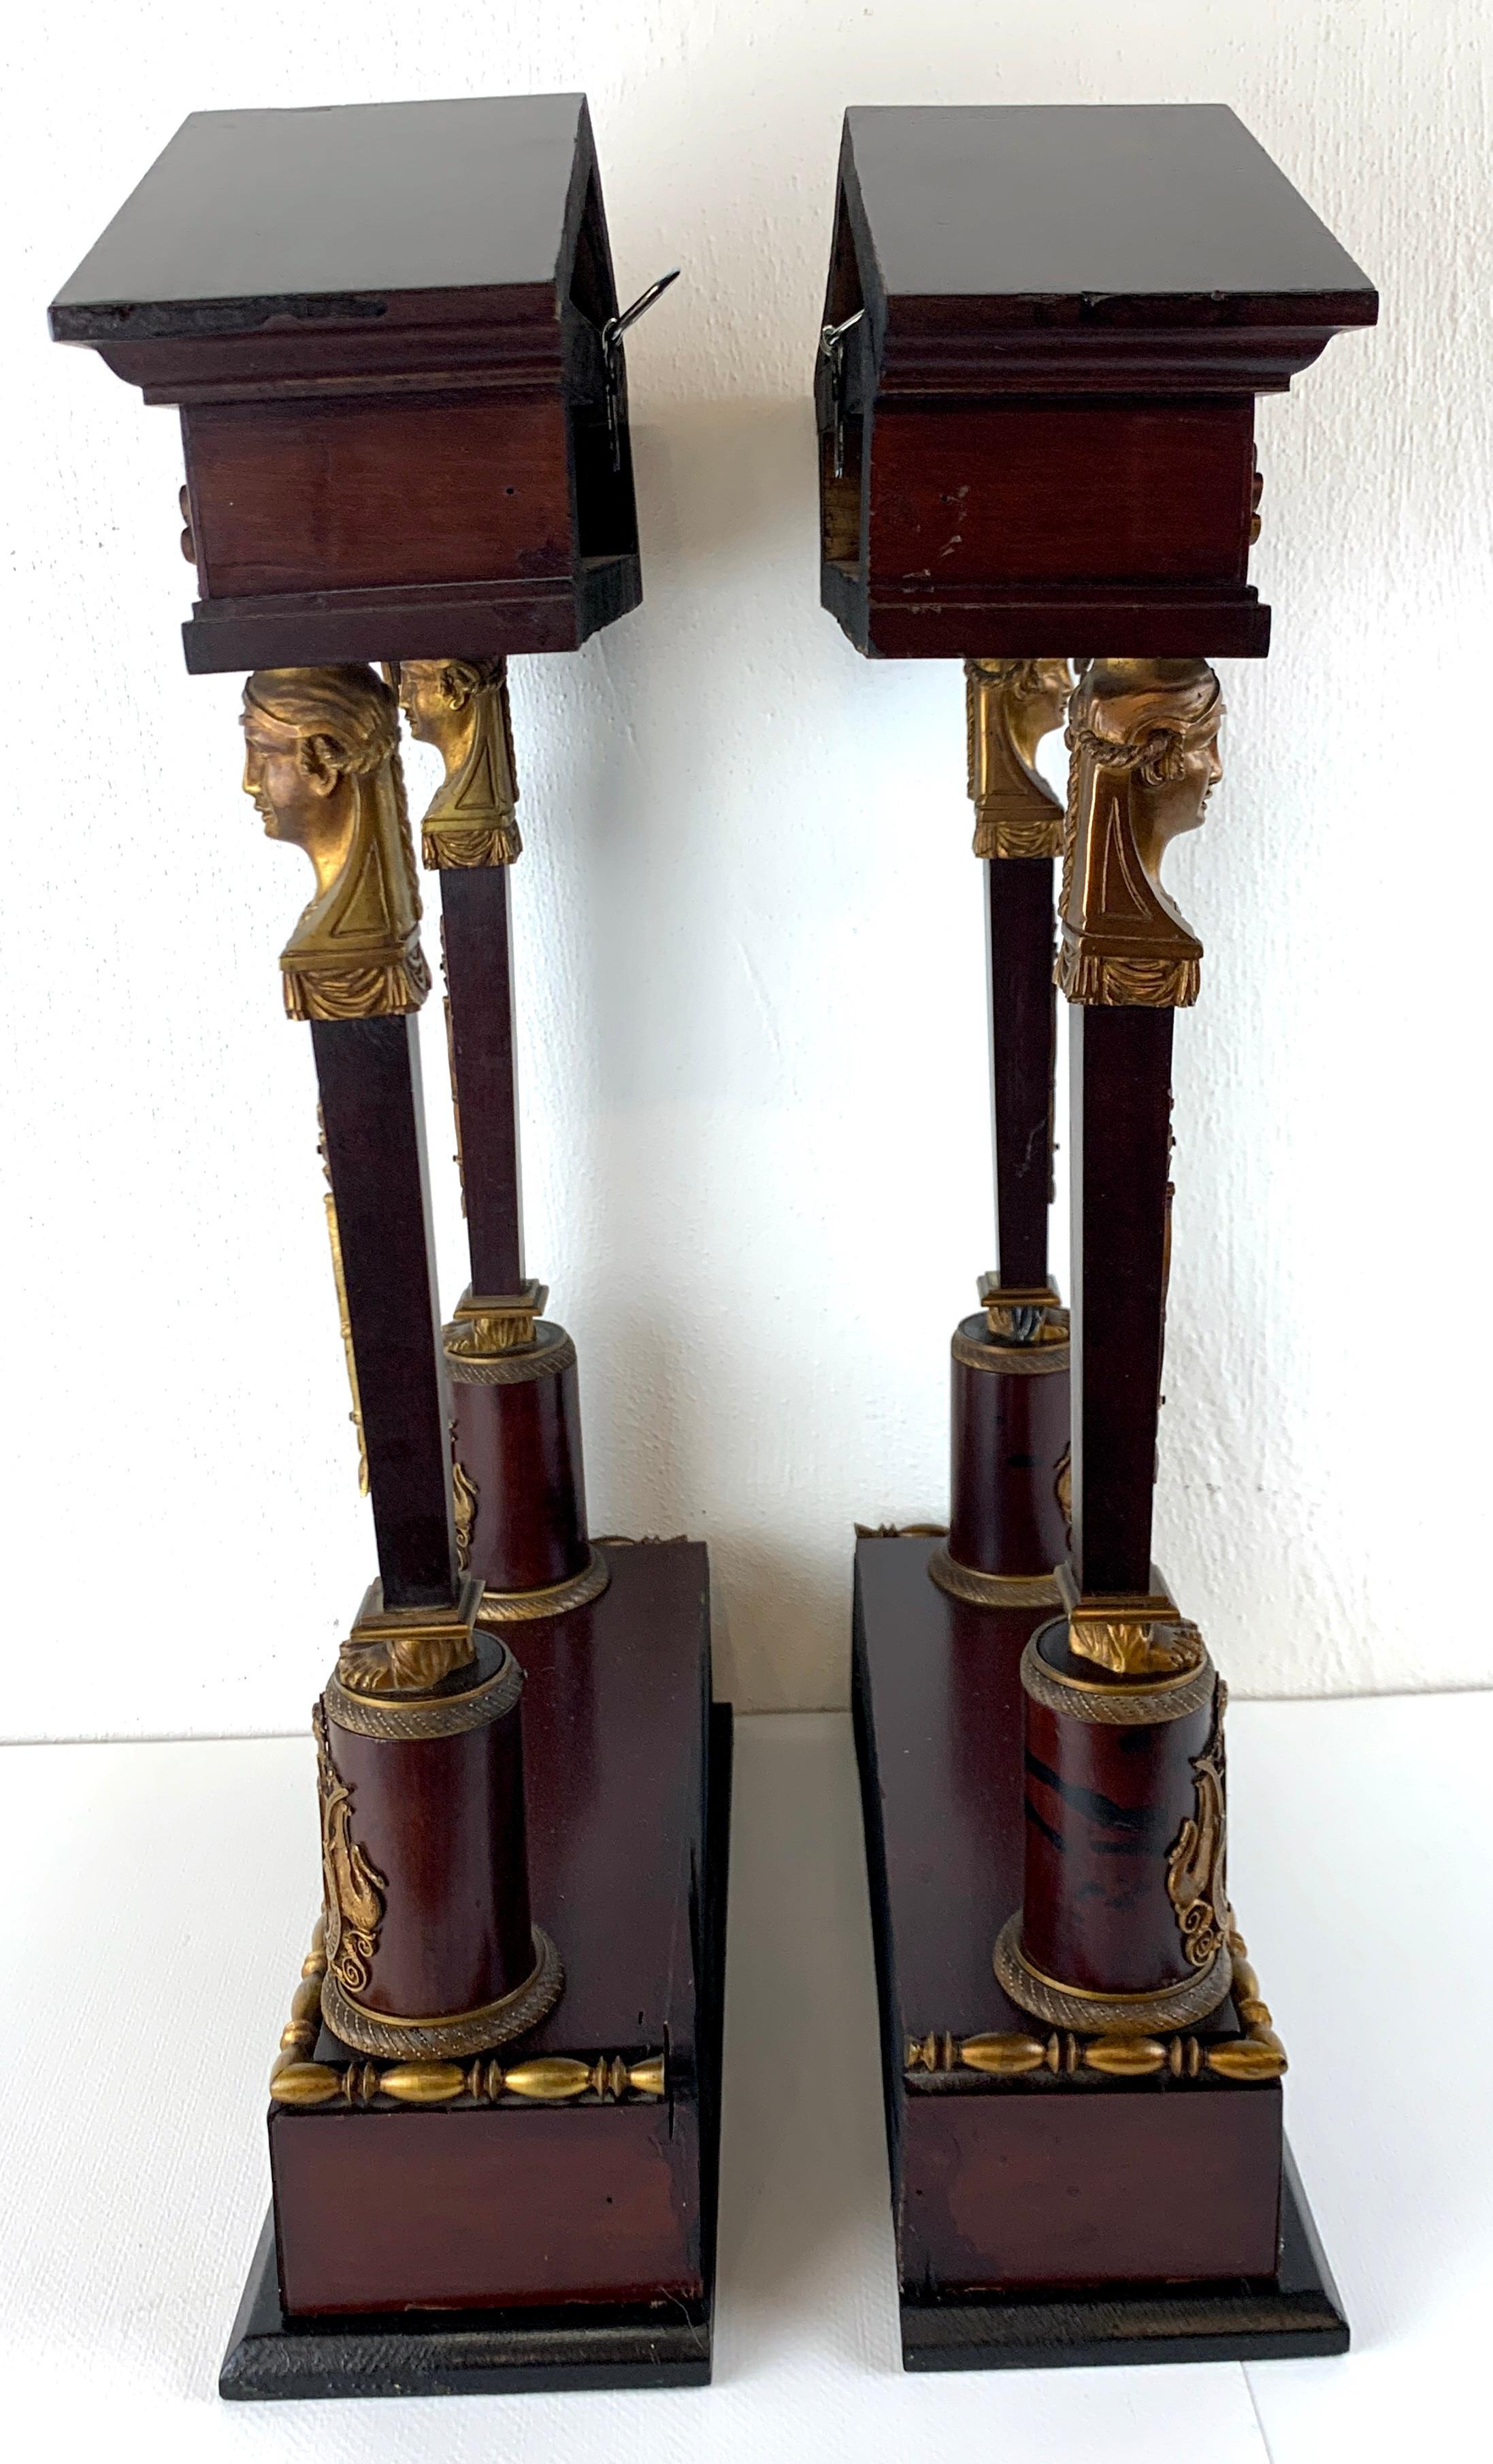 Pair of Second Empire Caryatid Wall Ormolu Mounted Wall Shelves In Good Condition For Sale In West Palm Beach, FL